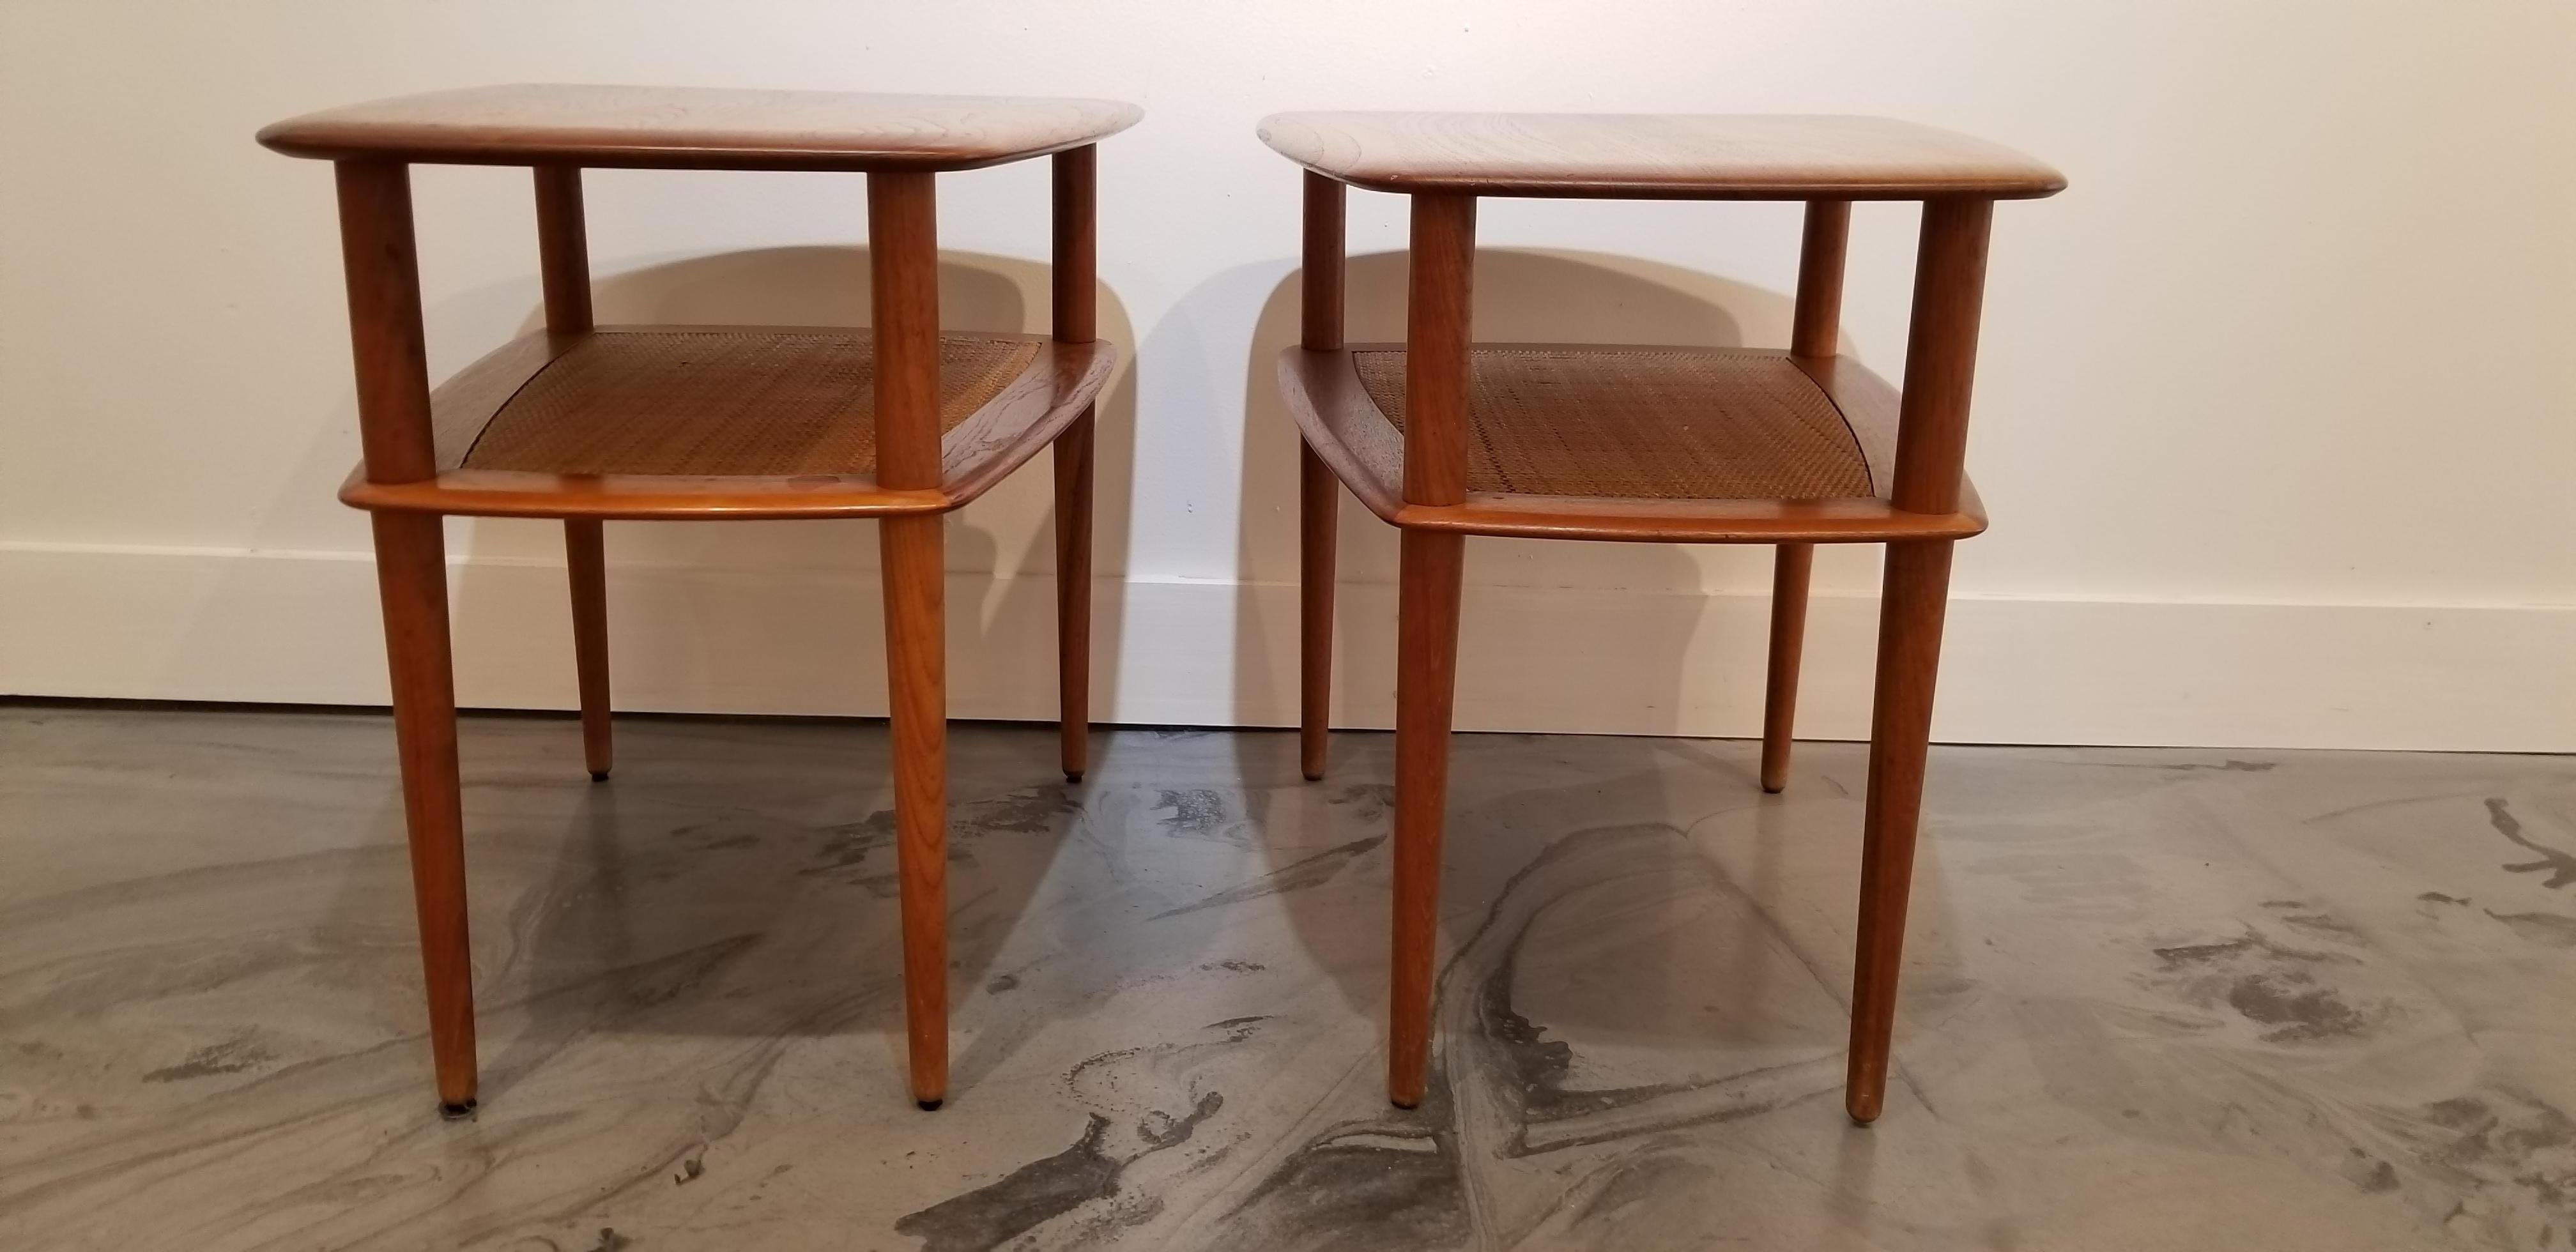 Peter Hvidt Teak Danish Modern End Tables, A Pair In Good Condition For Sale In Fulton, CA